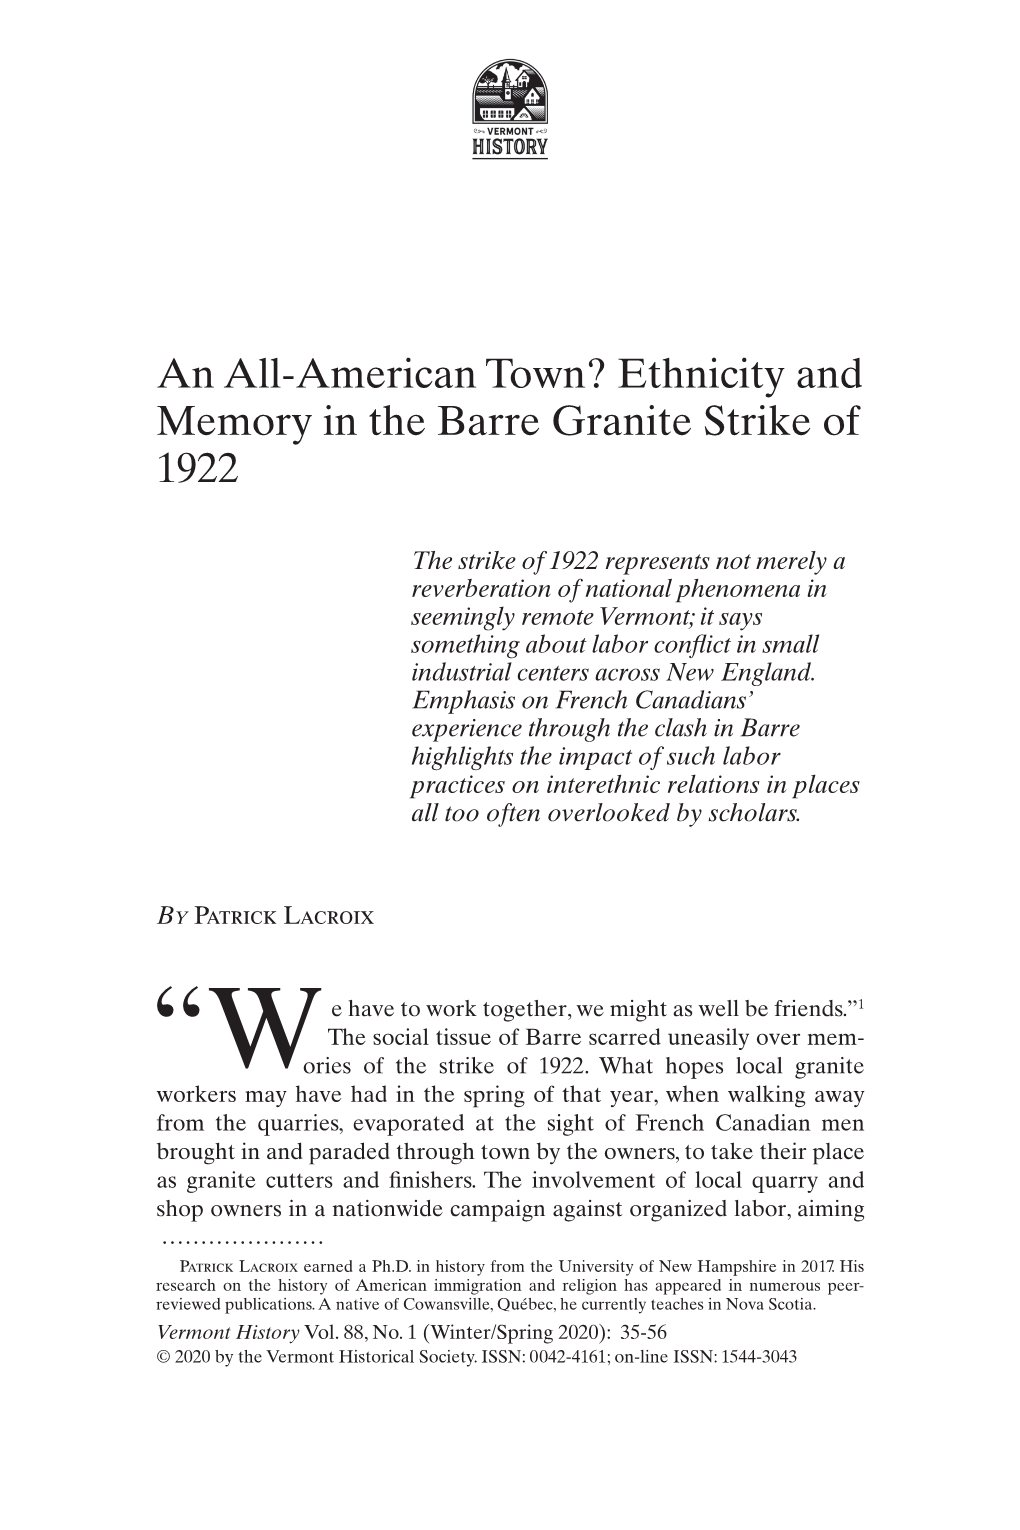 An All-American Town? Ethnicity and Memory in the Barre Granite Strike of 1922